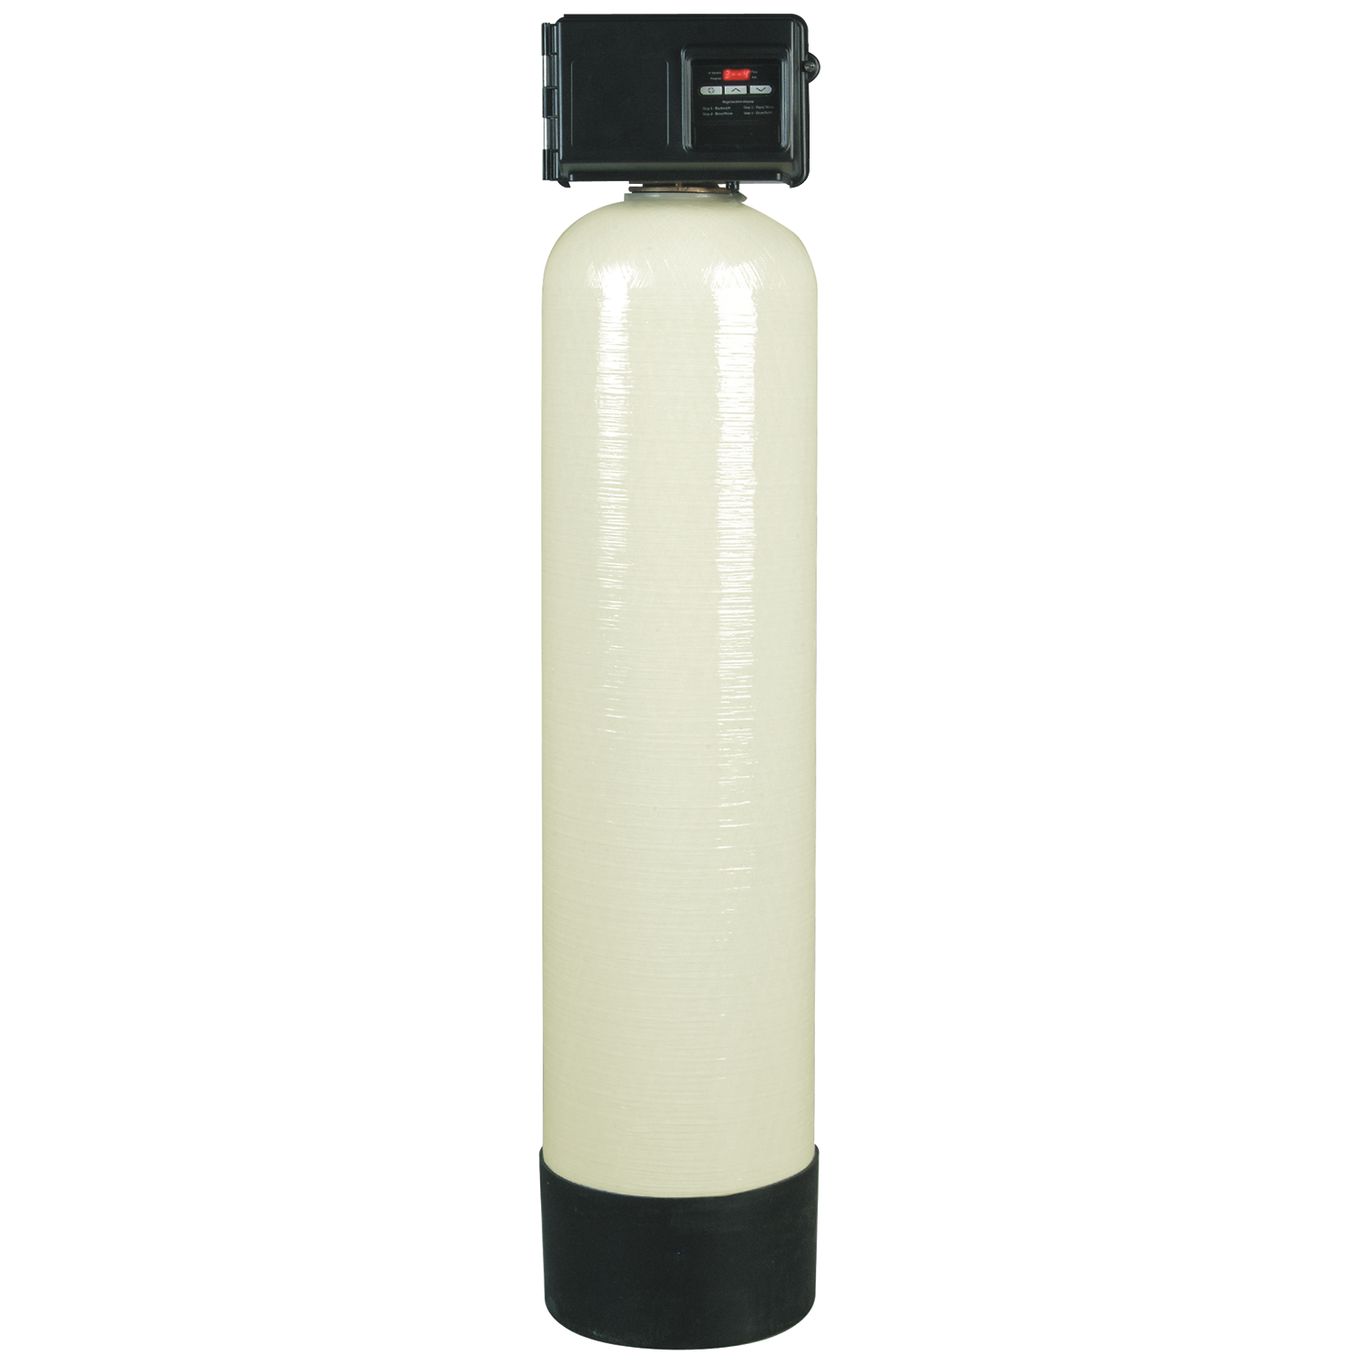 Filtration System, 1 1/2 Inch Inlet, 1 1/2 Inch Outlet